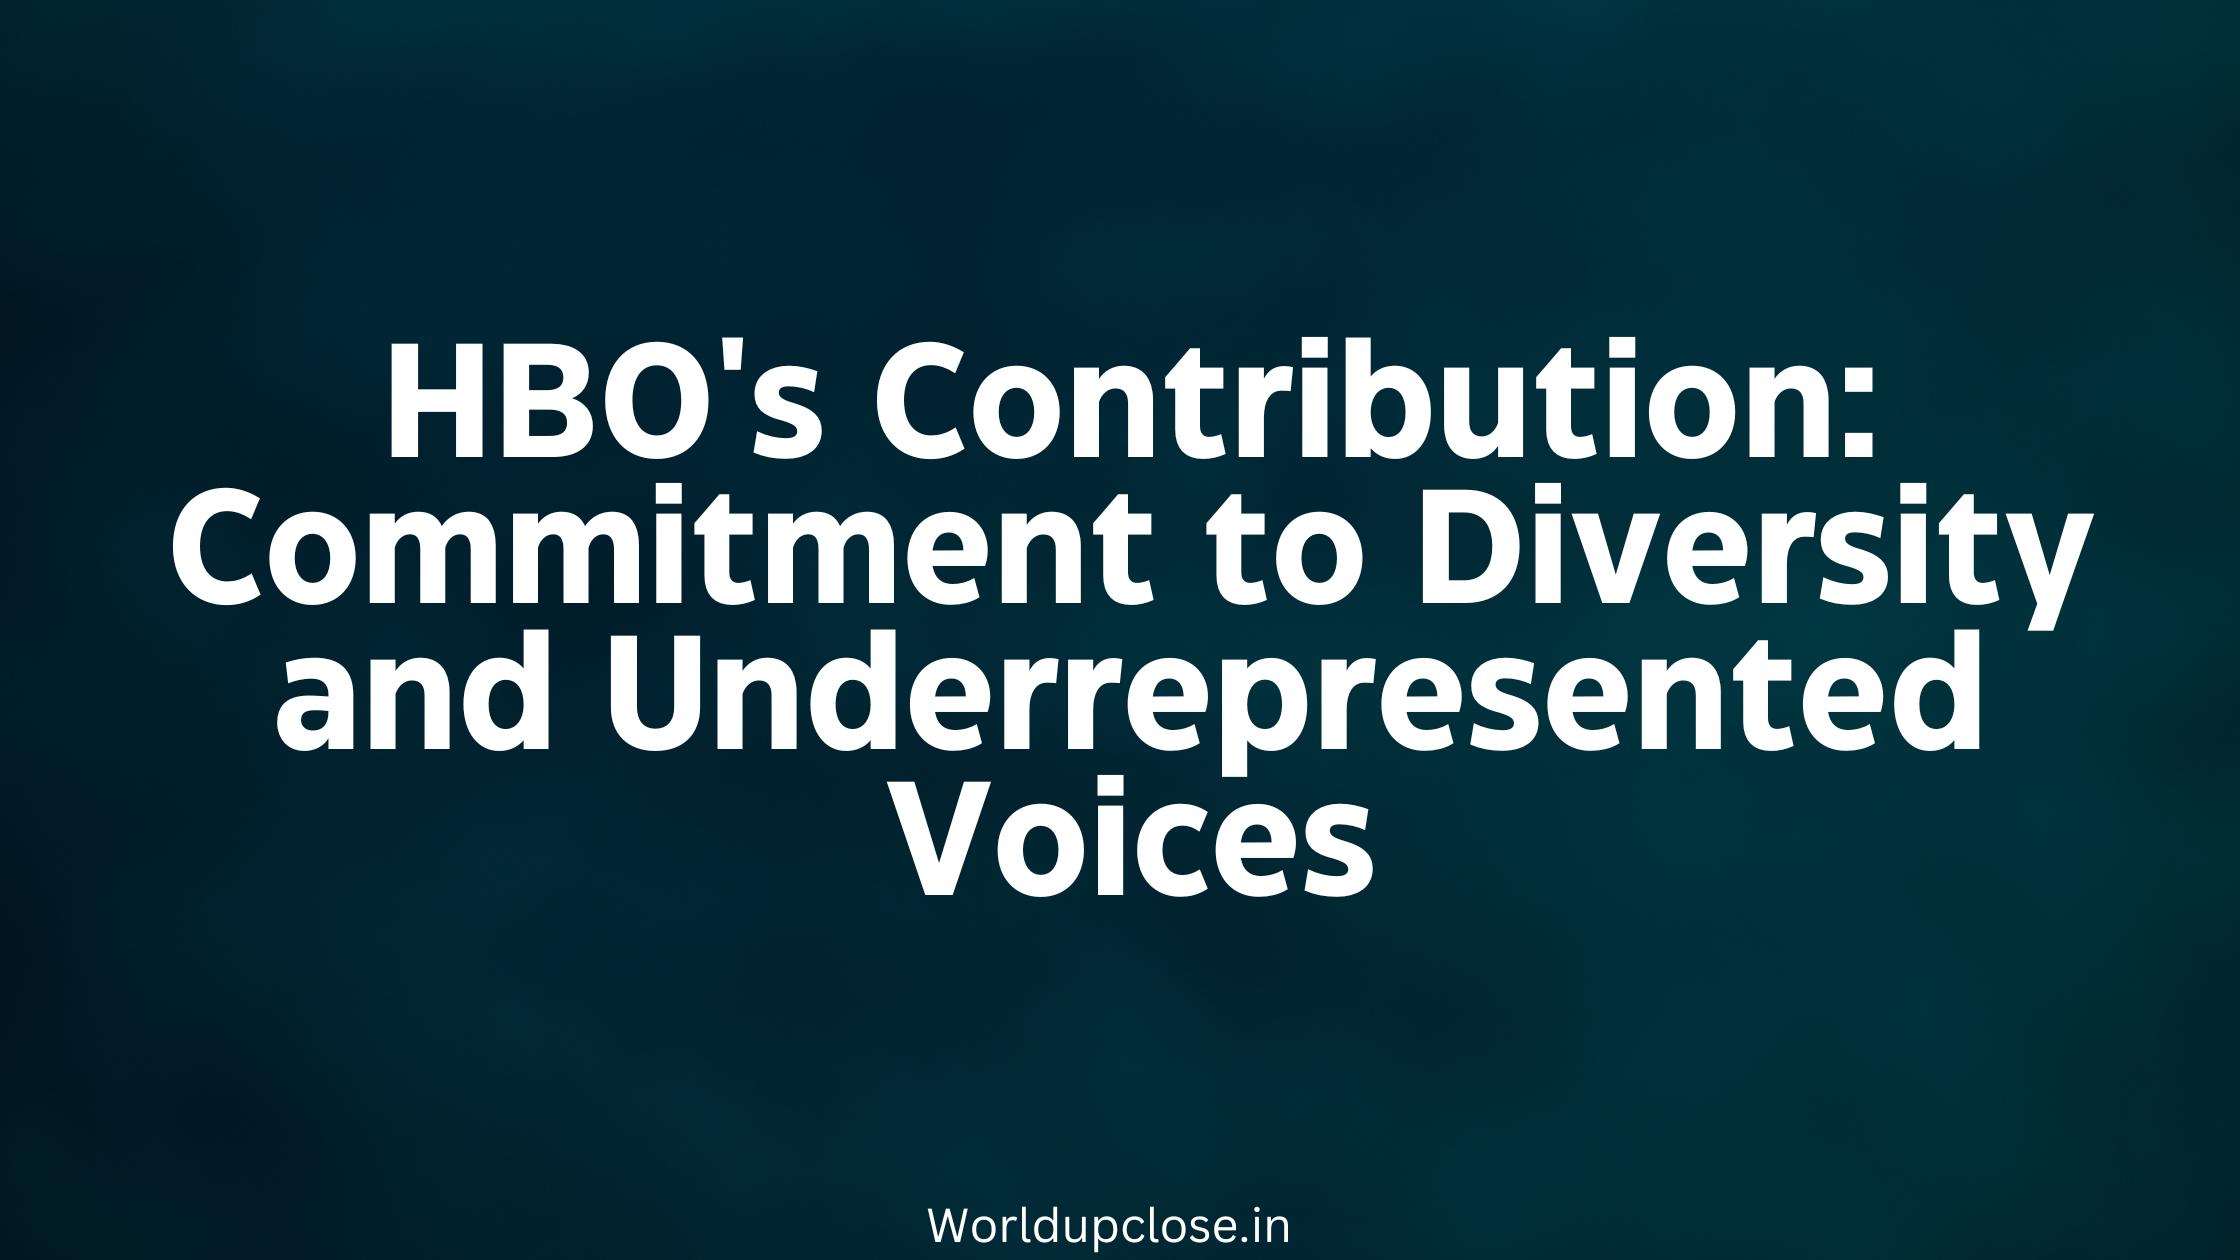 HBO's Contribution: Commitment to Diversity and Underrepresented Voices 25